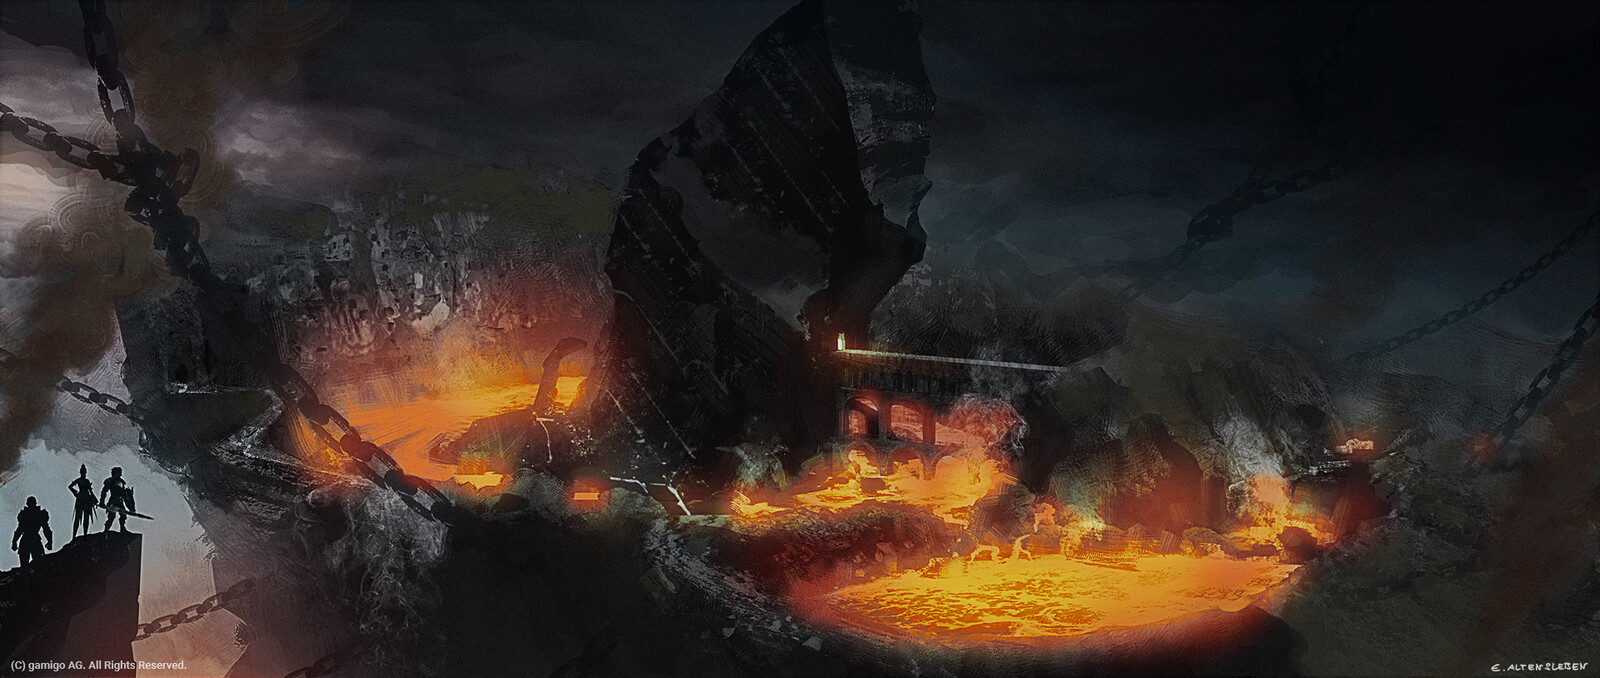 My basic thought on fire was to have a natural structure connected with some temple bridge elements. The idea was to use a massive Obsidian kind of rock for the temple surrounded by magma lakes and a volcanic area.